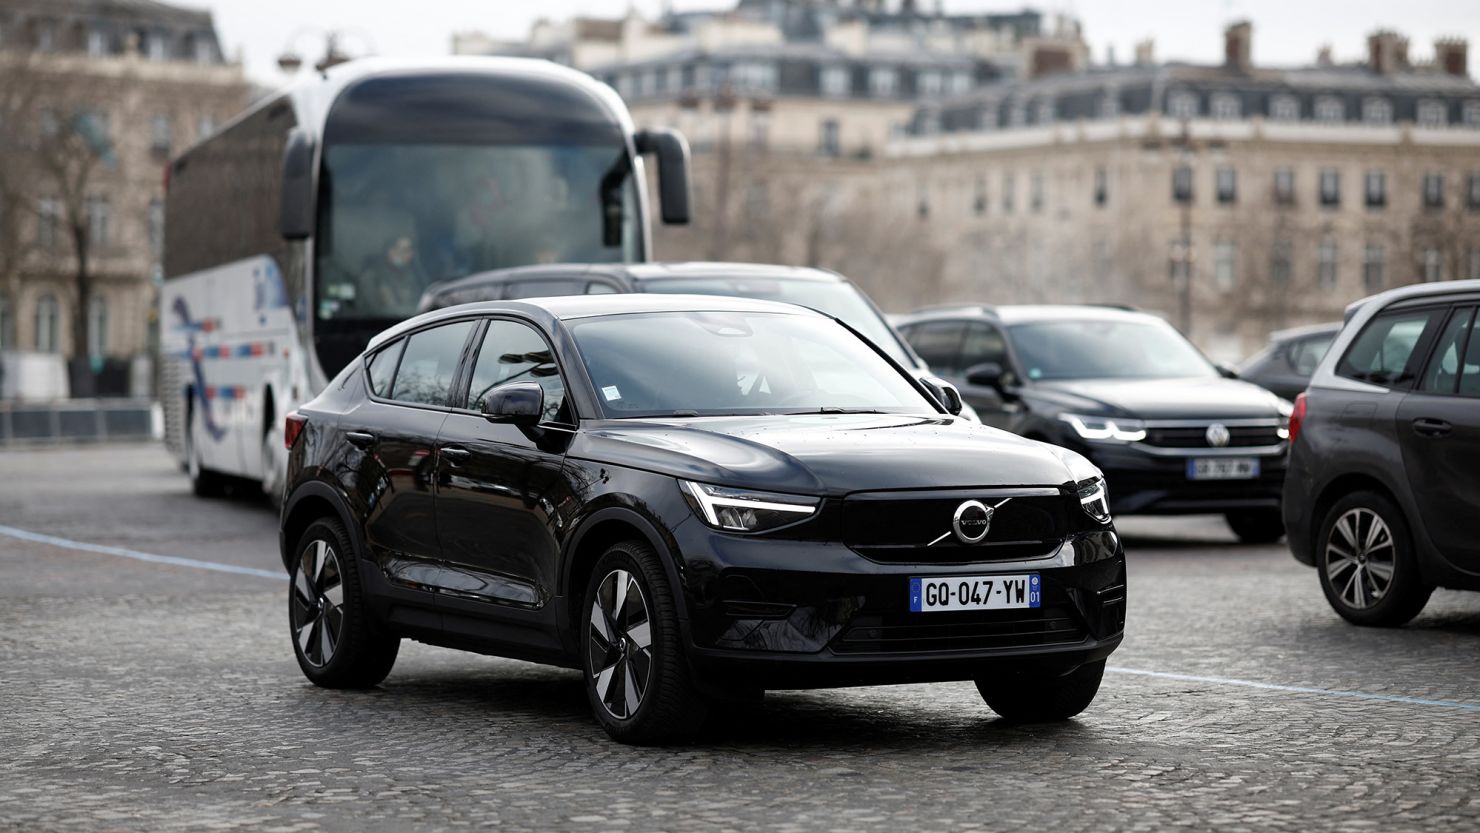 Parisians have voted to triple parking fees for SUVs on Sundays in their city.